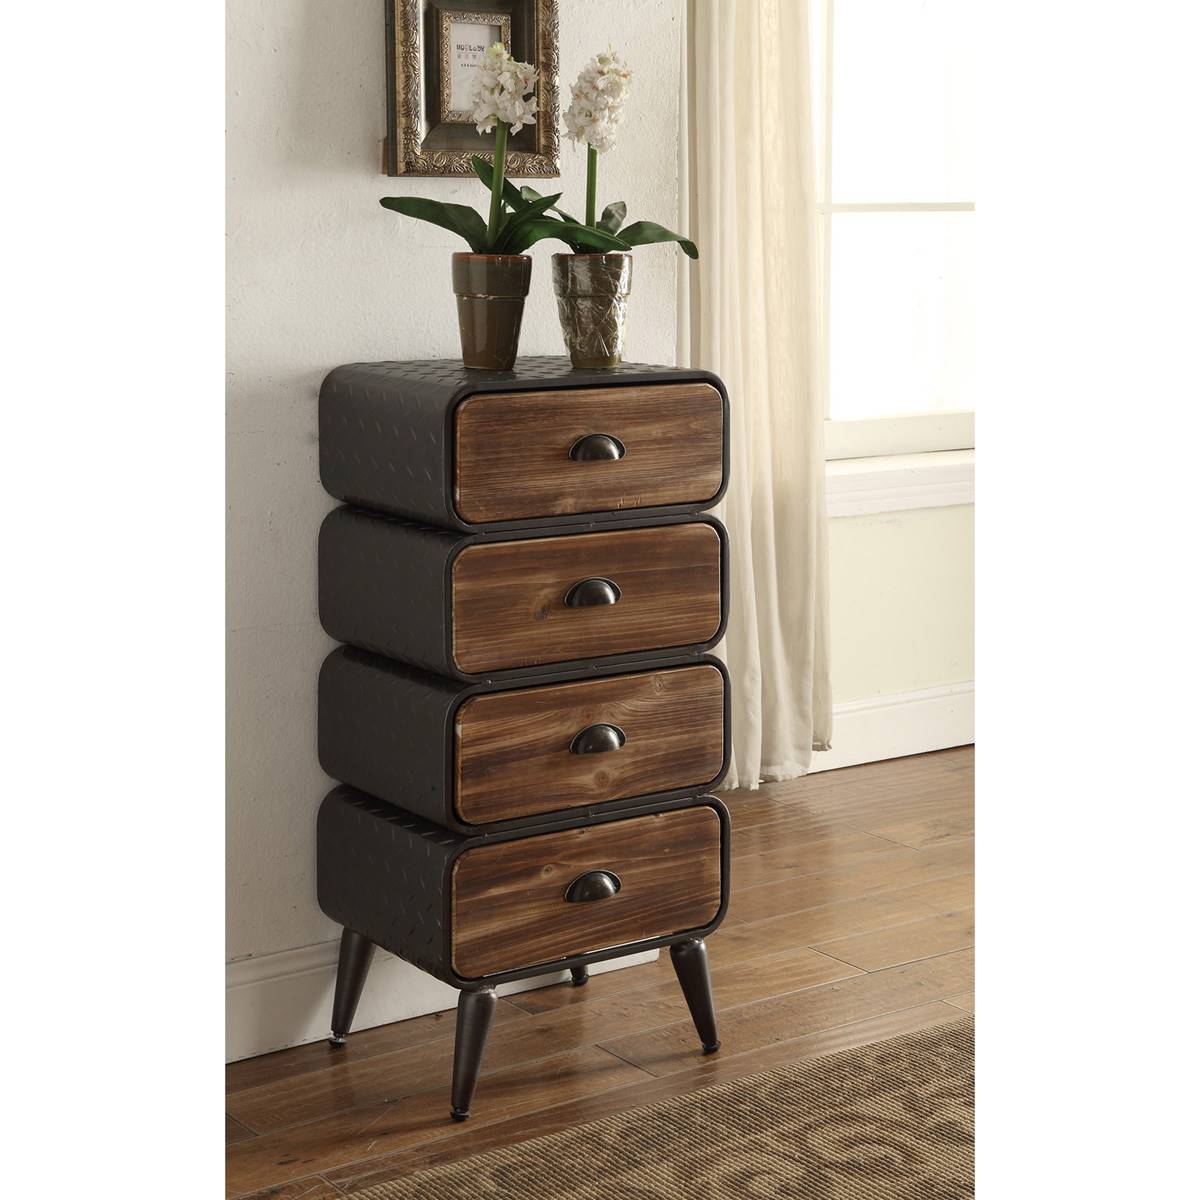 4D Concepts Urban Loft 4 Rounded Drawer Chest